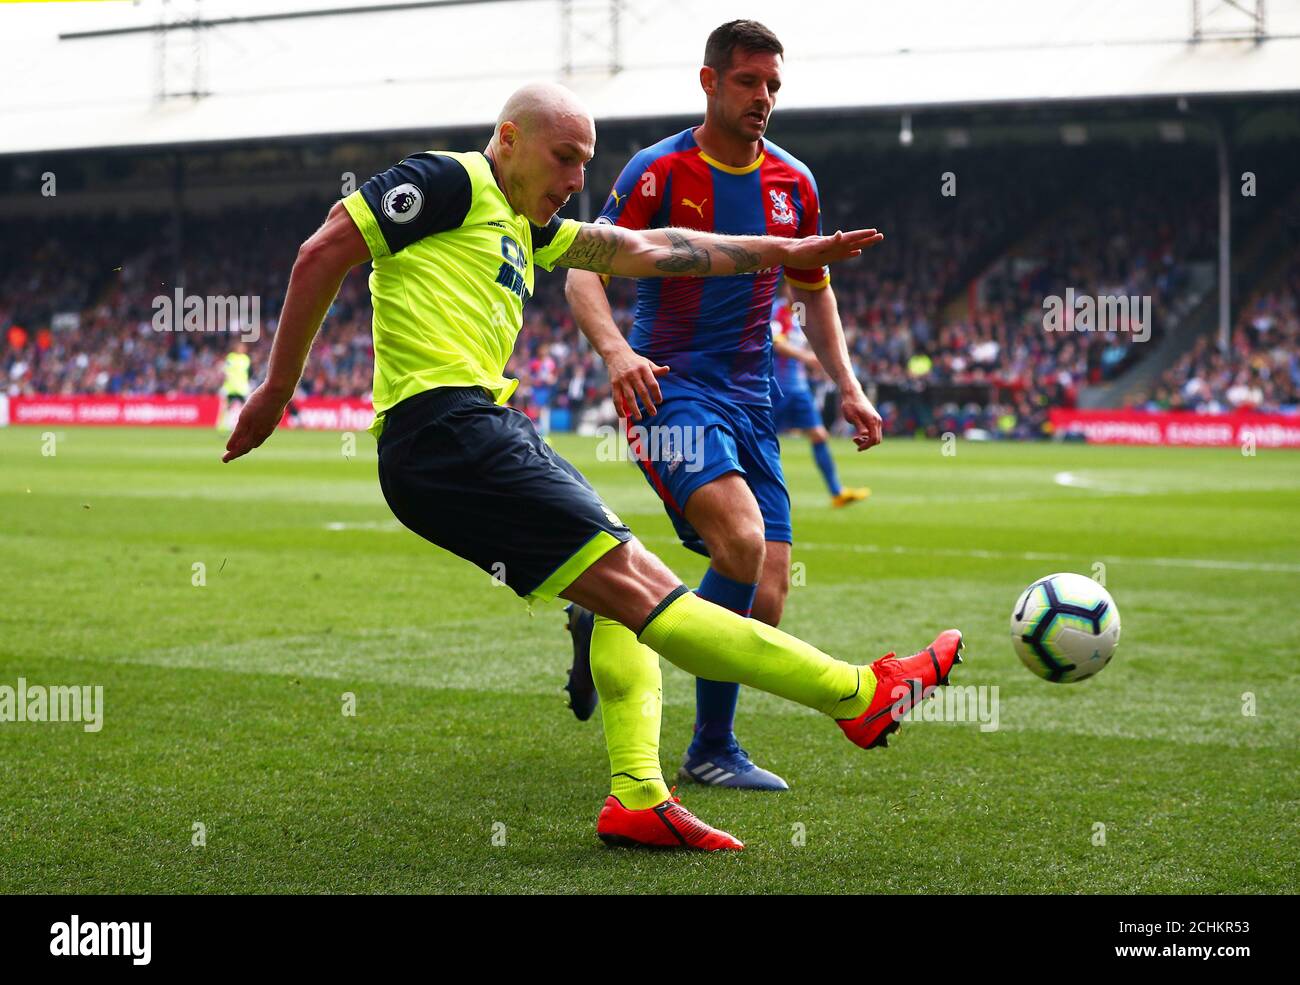 Soccer Football - Premier League - Crystal Palace v Huddersfield Town - Selhurst Park, London, Britain - March 30, 2019  Huddersfield Town's Aaron Mooy in action   REUTERS/Hannah McKay  EDITORIAL USE ONLY. No use with unauthorized audio, video, data, fixture lists, club/league logos or 'live' services. Online in-match use limited to 75 images, no video emulation. No use in betting, games or single club/league/player publications.  Please contact your account representative for further details. Stock Photo